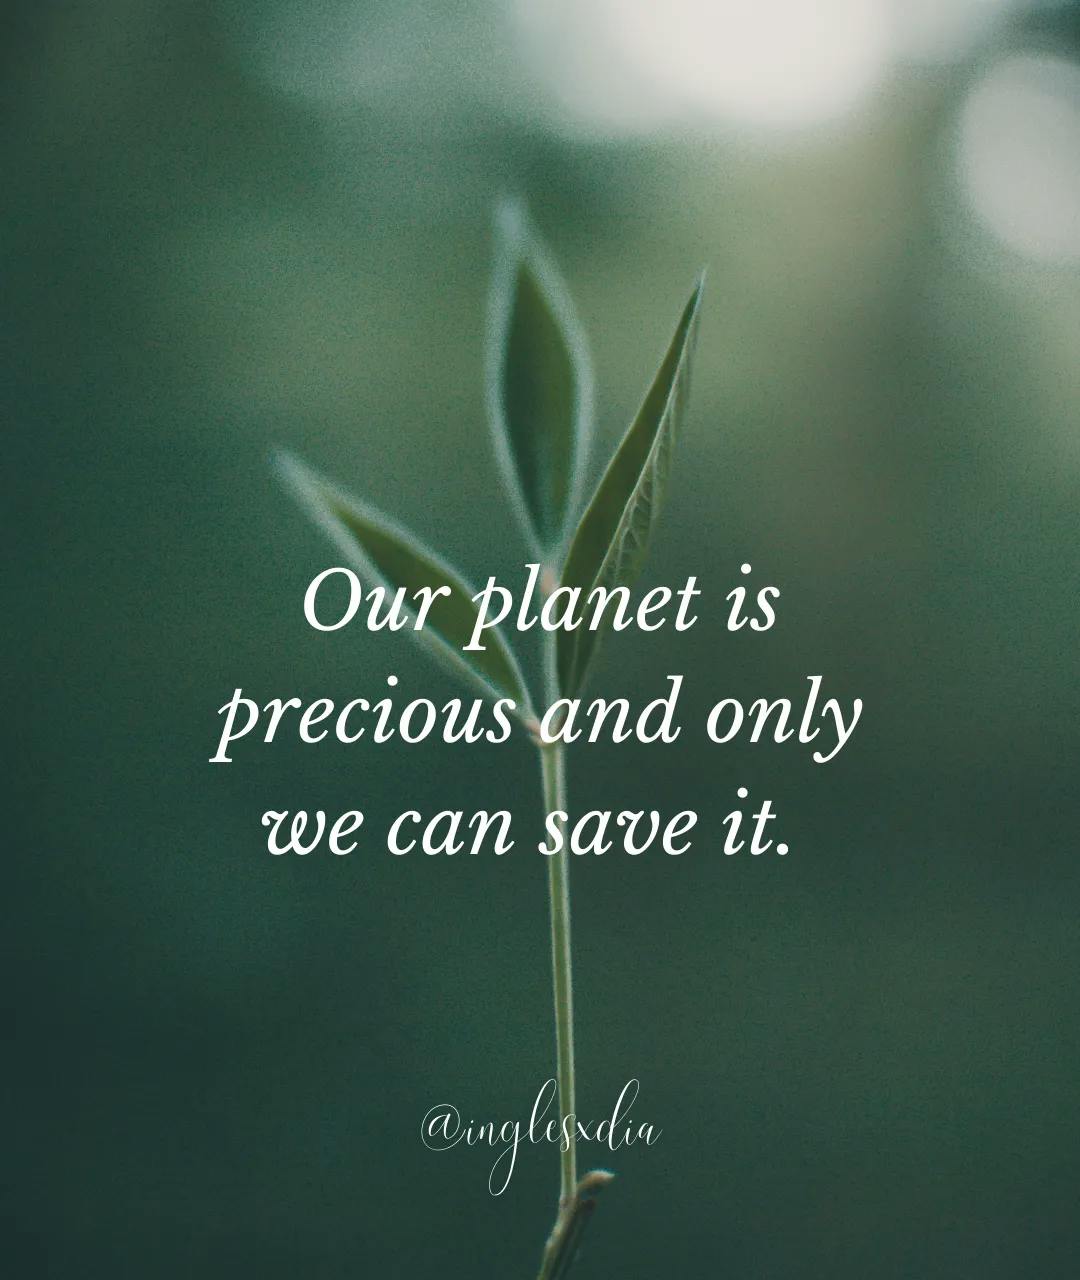 Frases motivadoras en inglés:  Our planet is precious and only we can save it